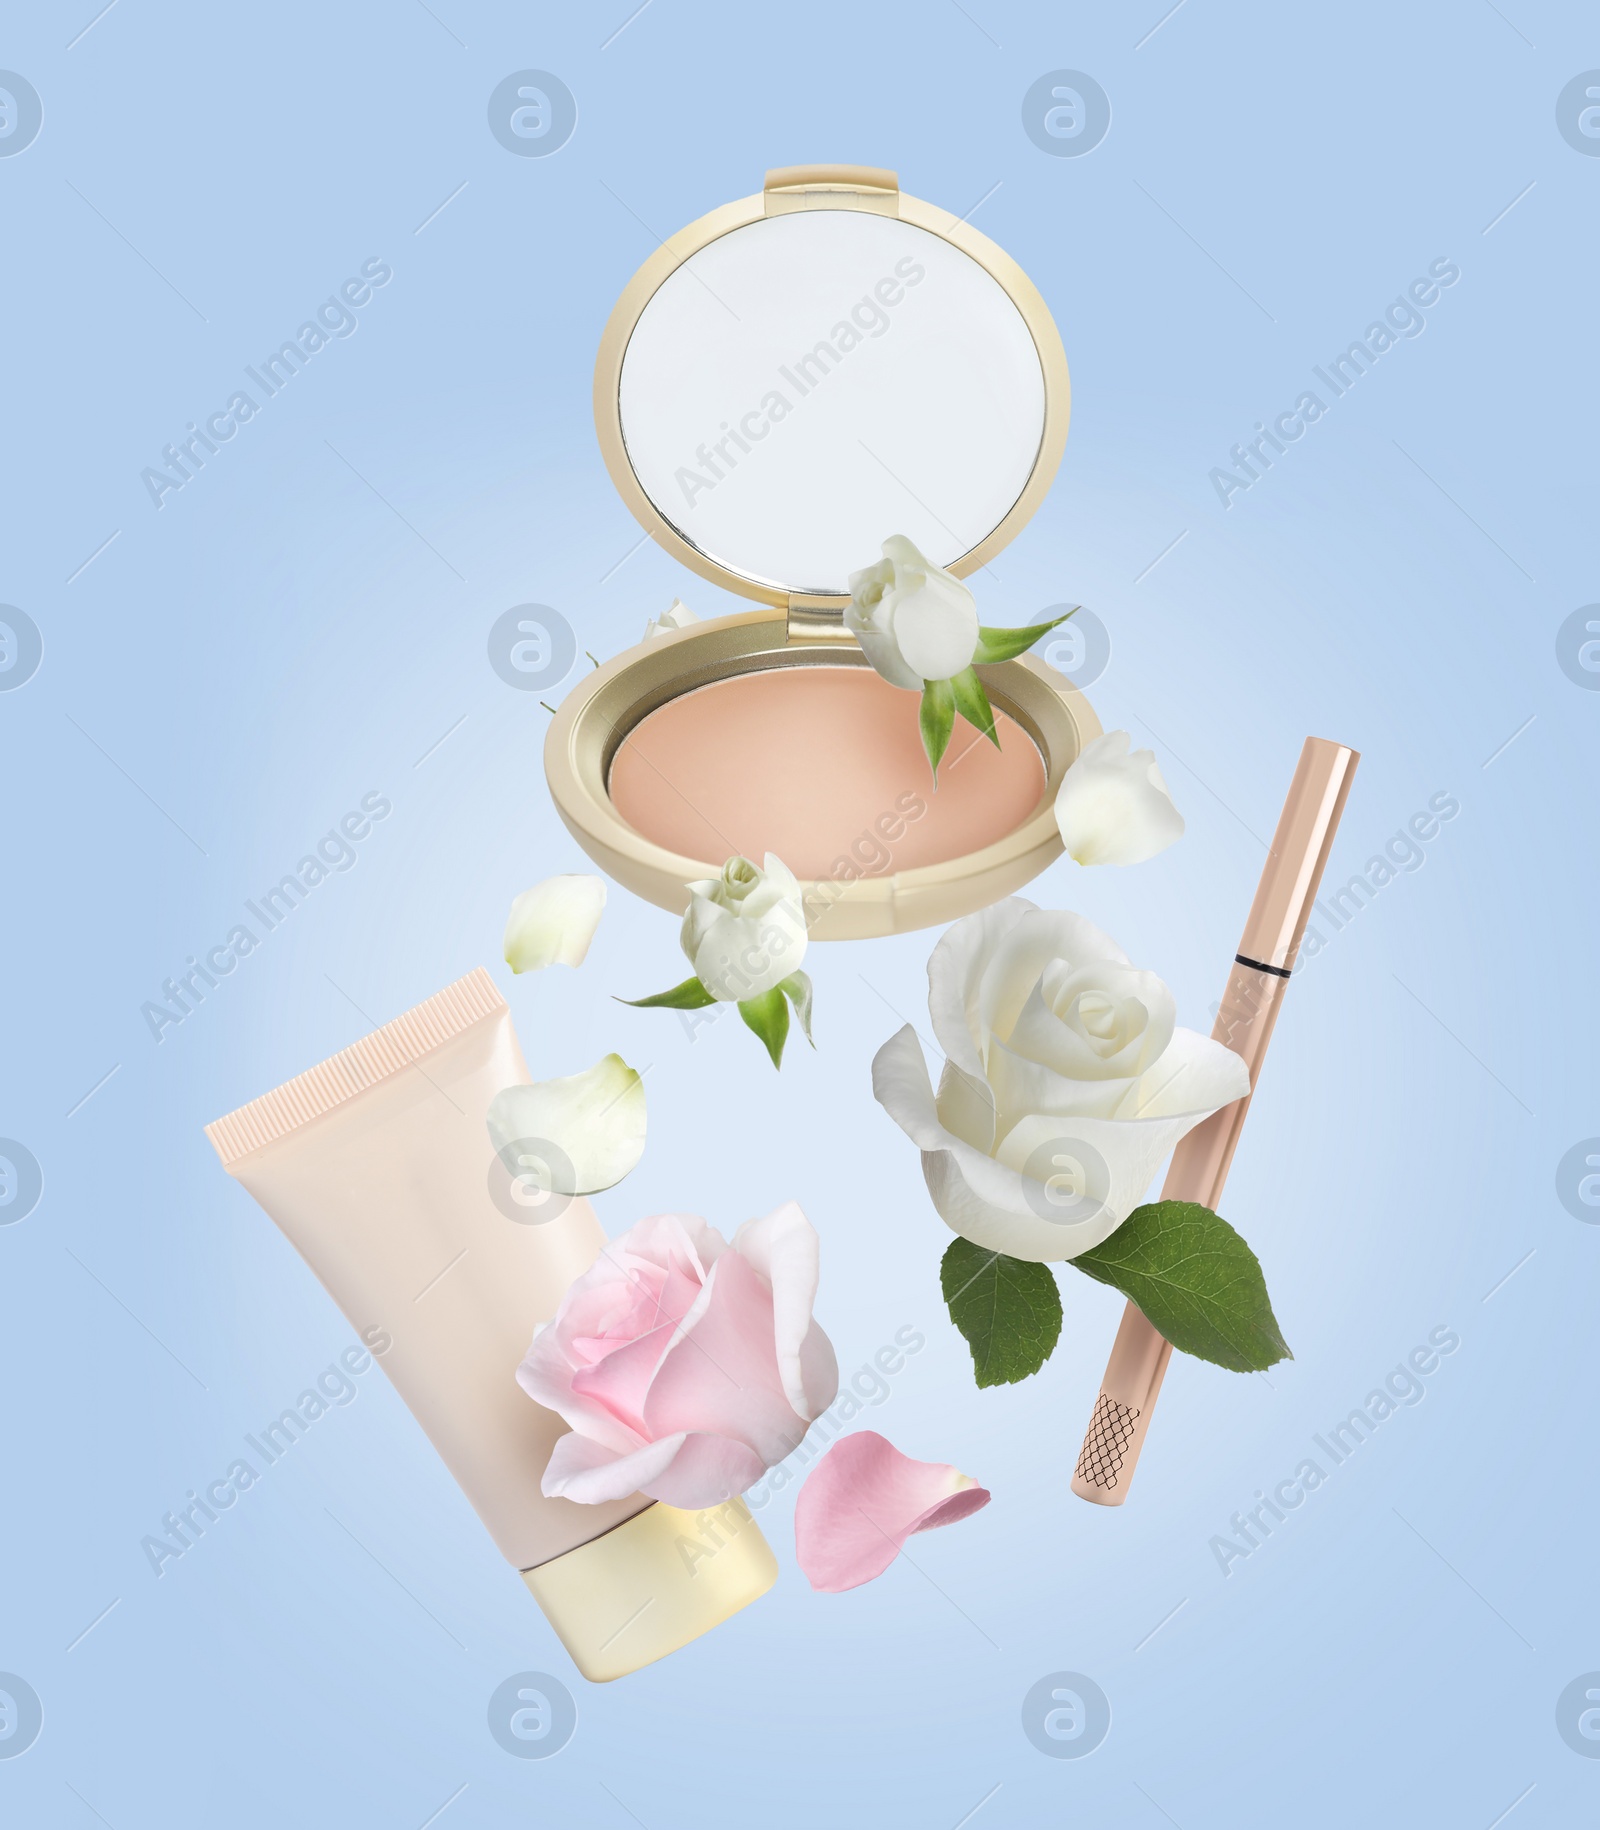 Image of Different makeup products and beautiful roses in air on light blue background